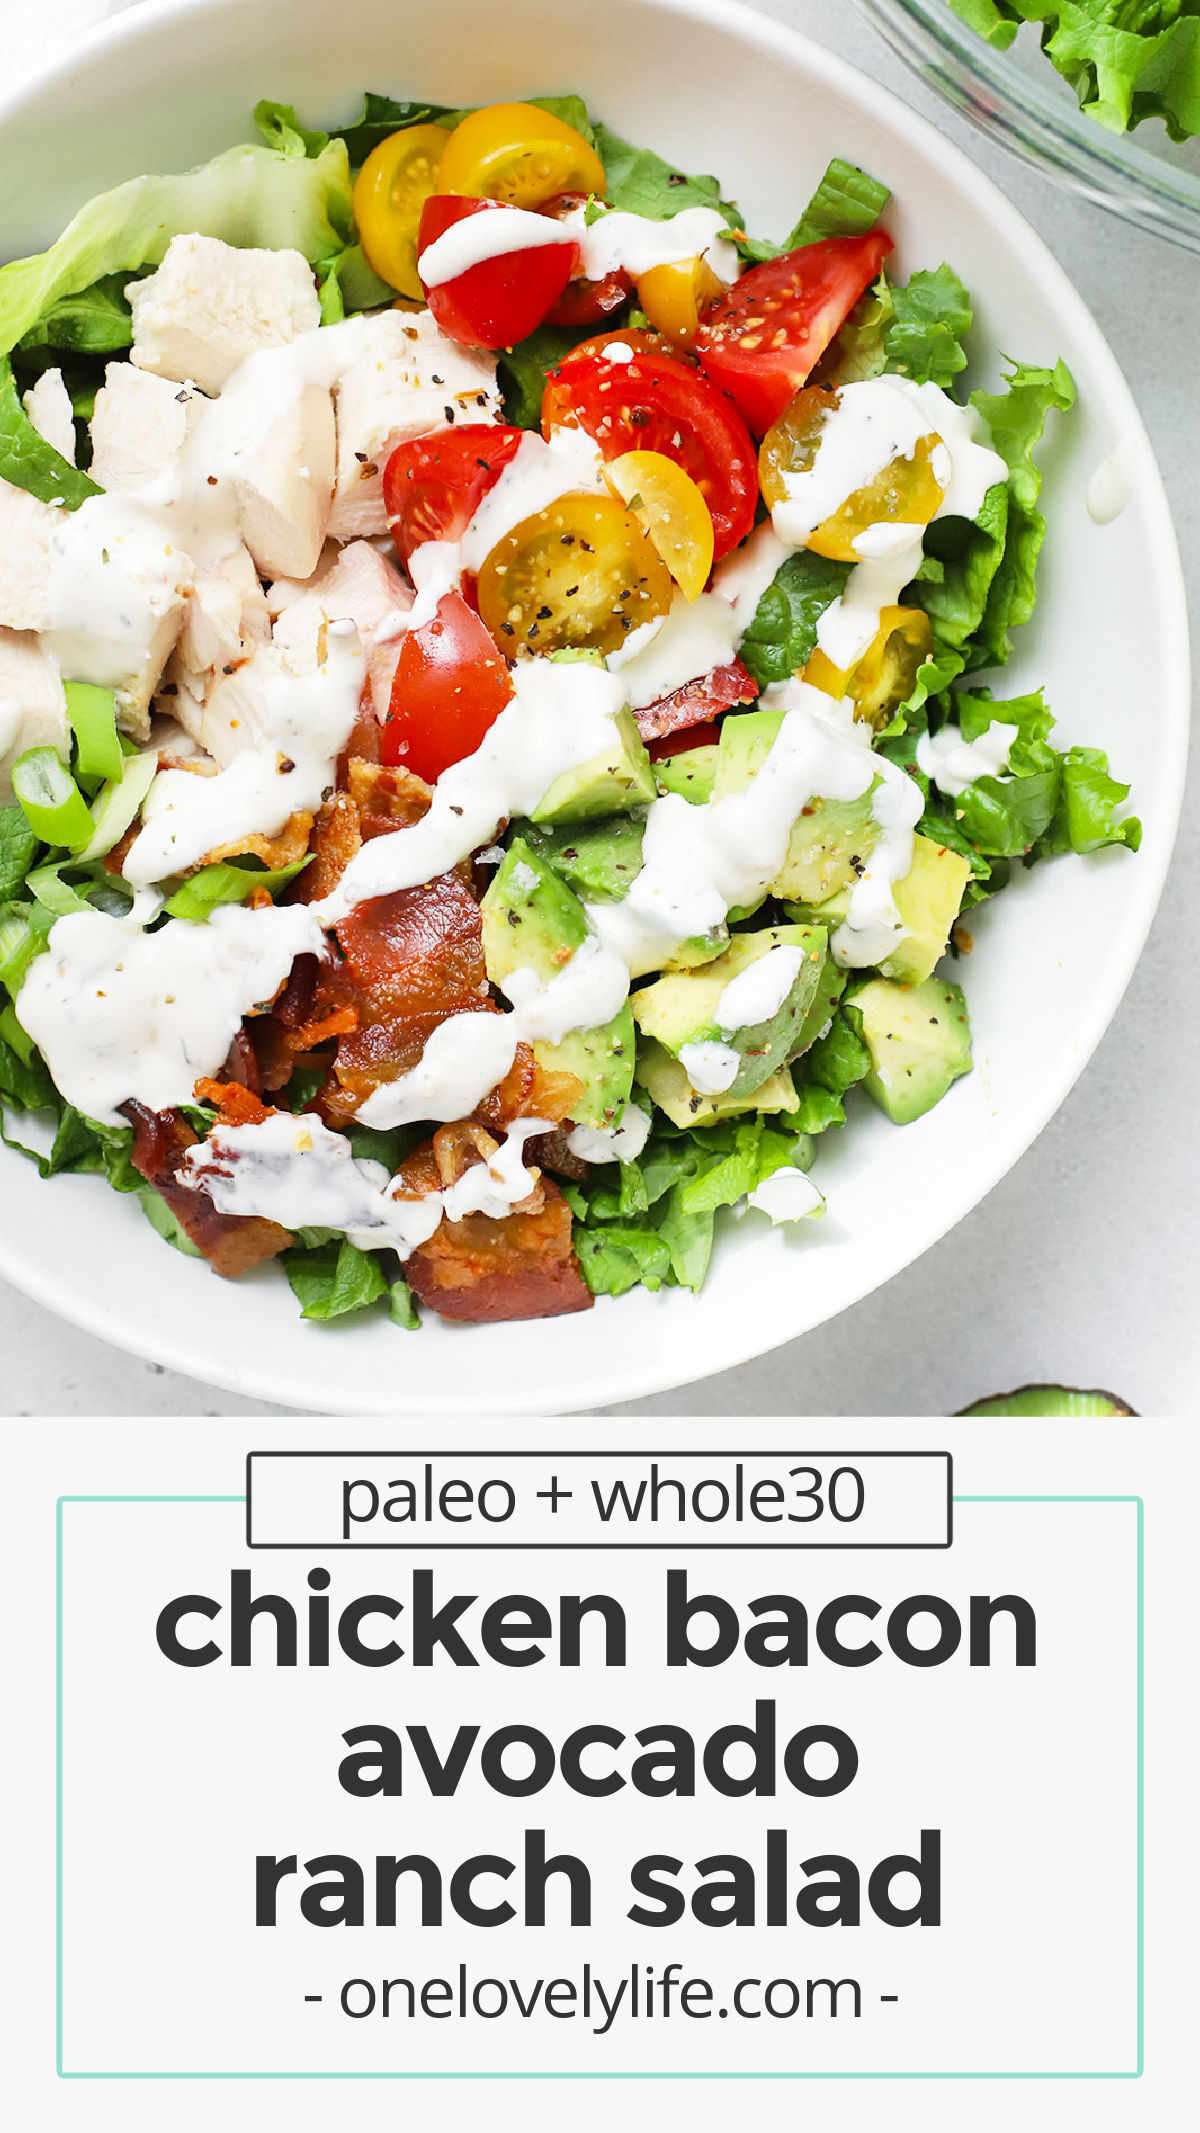 Chicken Bacon Avocado Ranch Salad - This chicken bacon ranch salad is loaded with goodies & finished with our creamy homemade ranch dressing. You'll LOVE it! (Paleo & Whole30 Friendly) // bacon ranch chicken salad // chicken bacon ranch salad recipe // paleo ranch // avocado chicken salad // main dish salad // dinner salad // picnic salad // potluck salad // low carb salad //